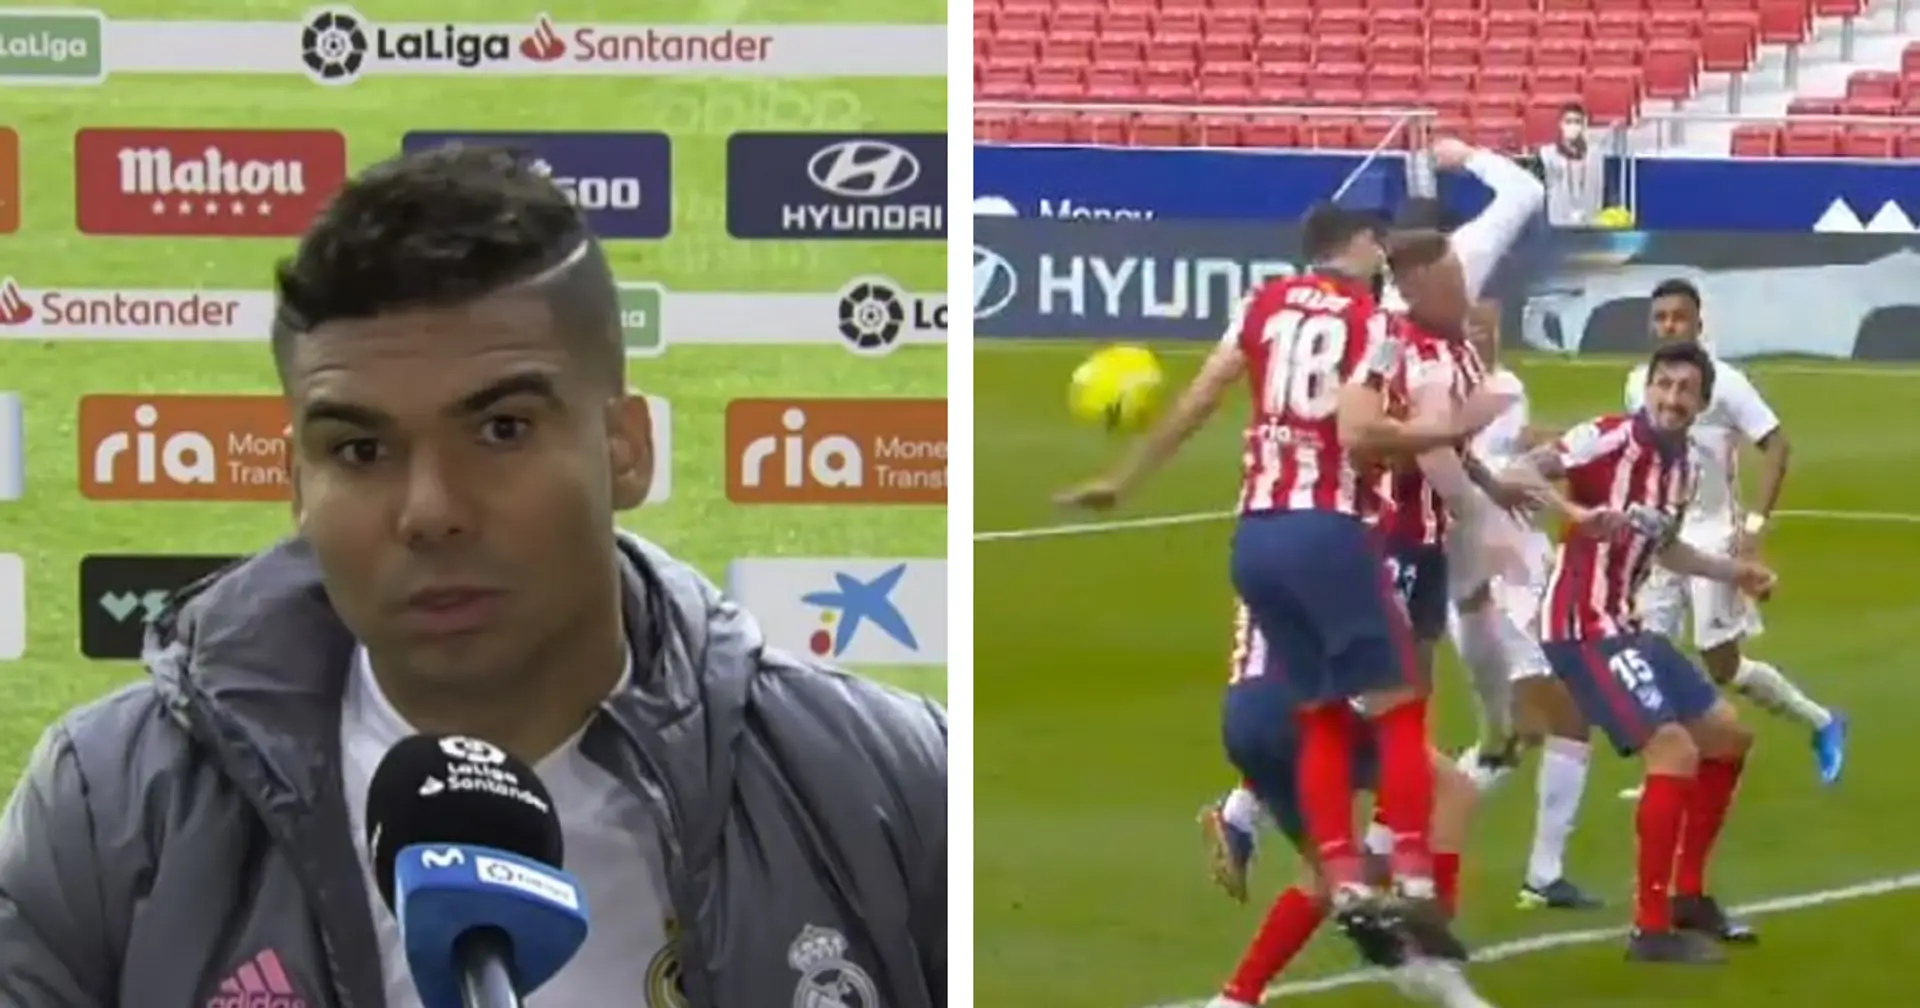 Casemiro: 'If the ball didn't touch Felipe's arm, I would have scored'